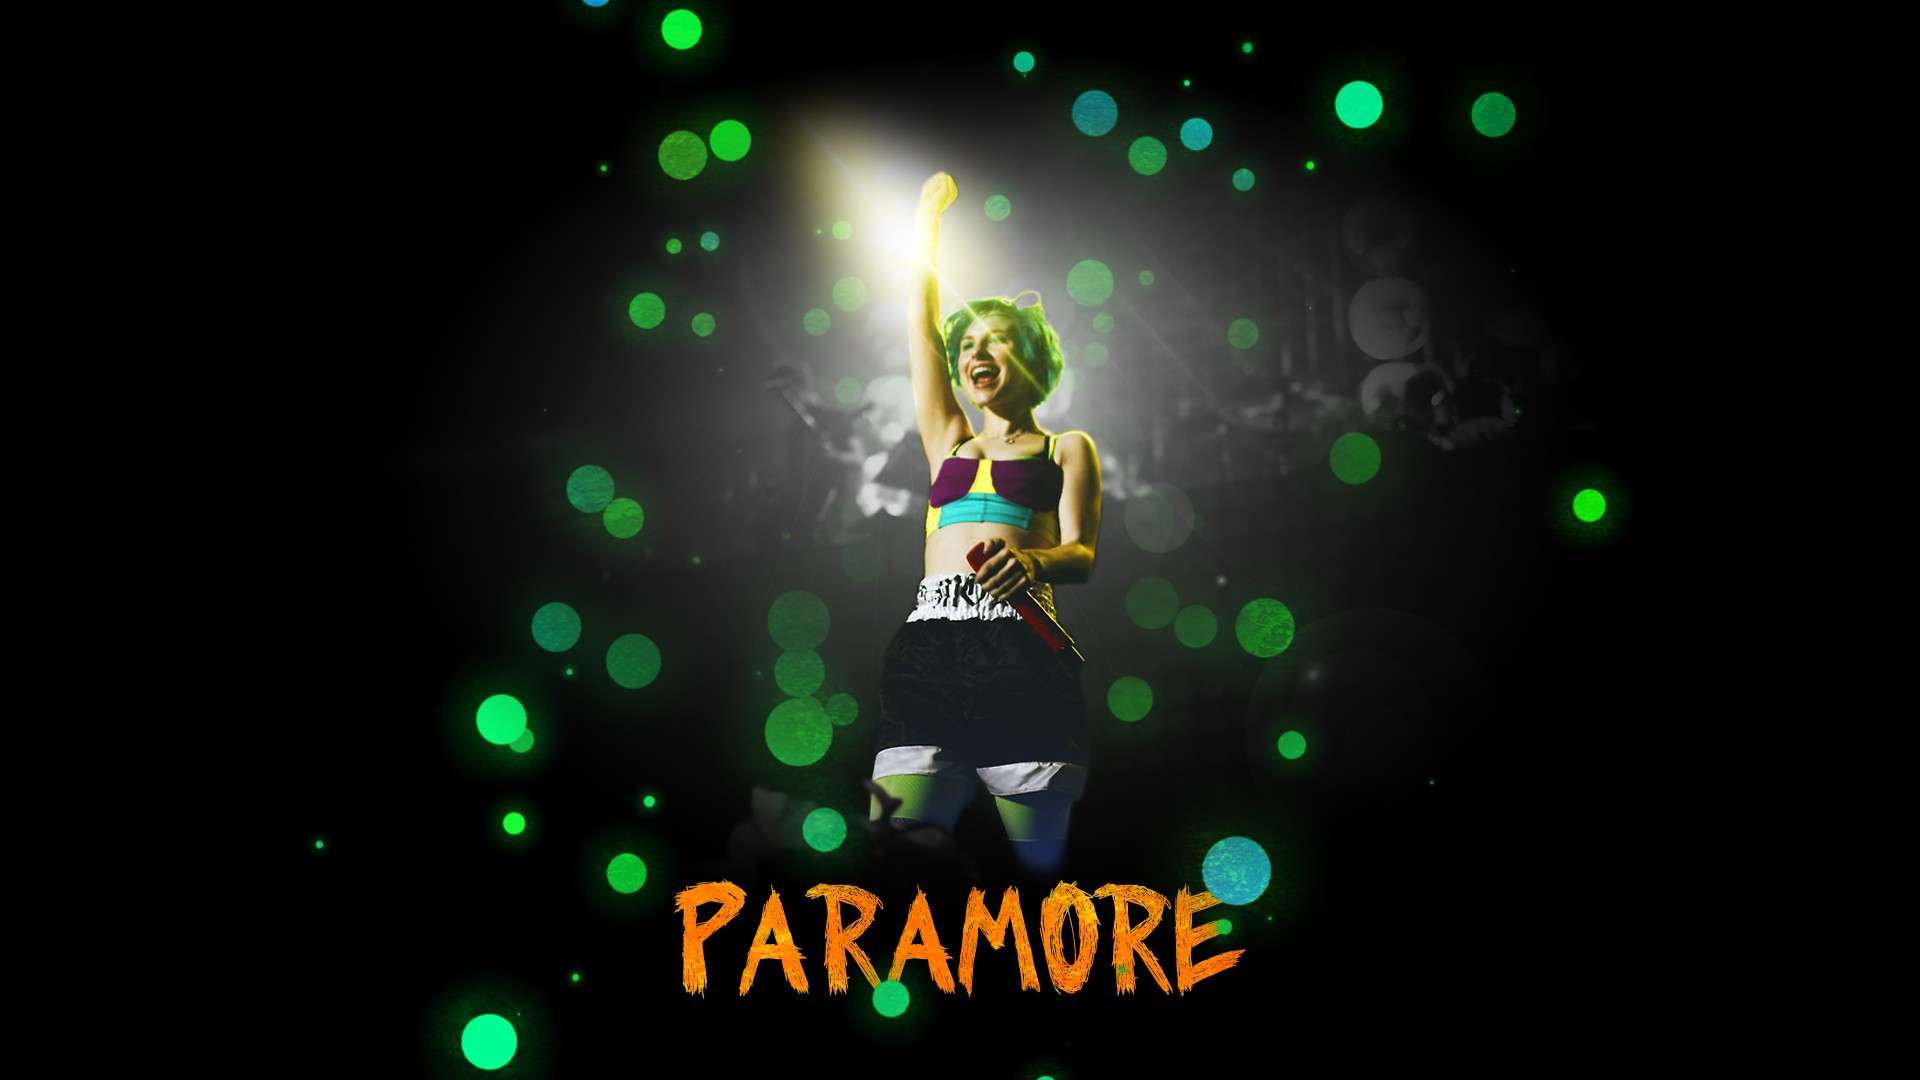 People 1920x1080 women singer Paramore music arms up